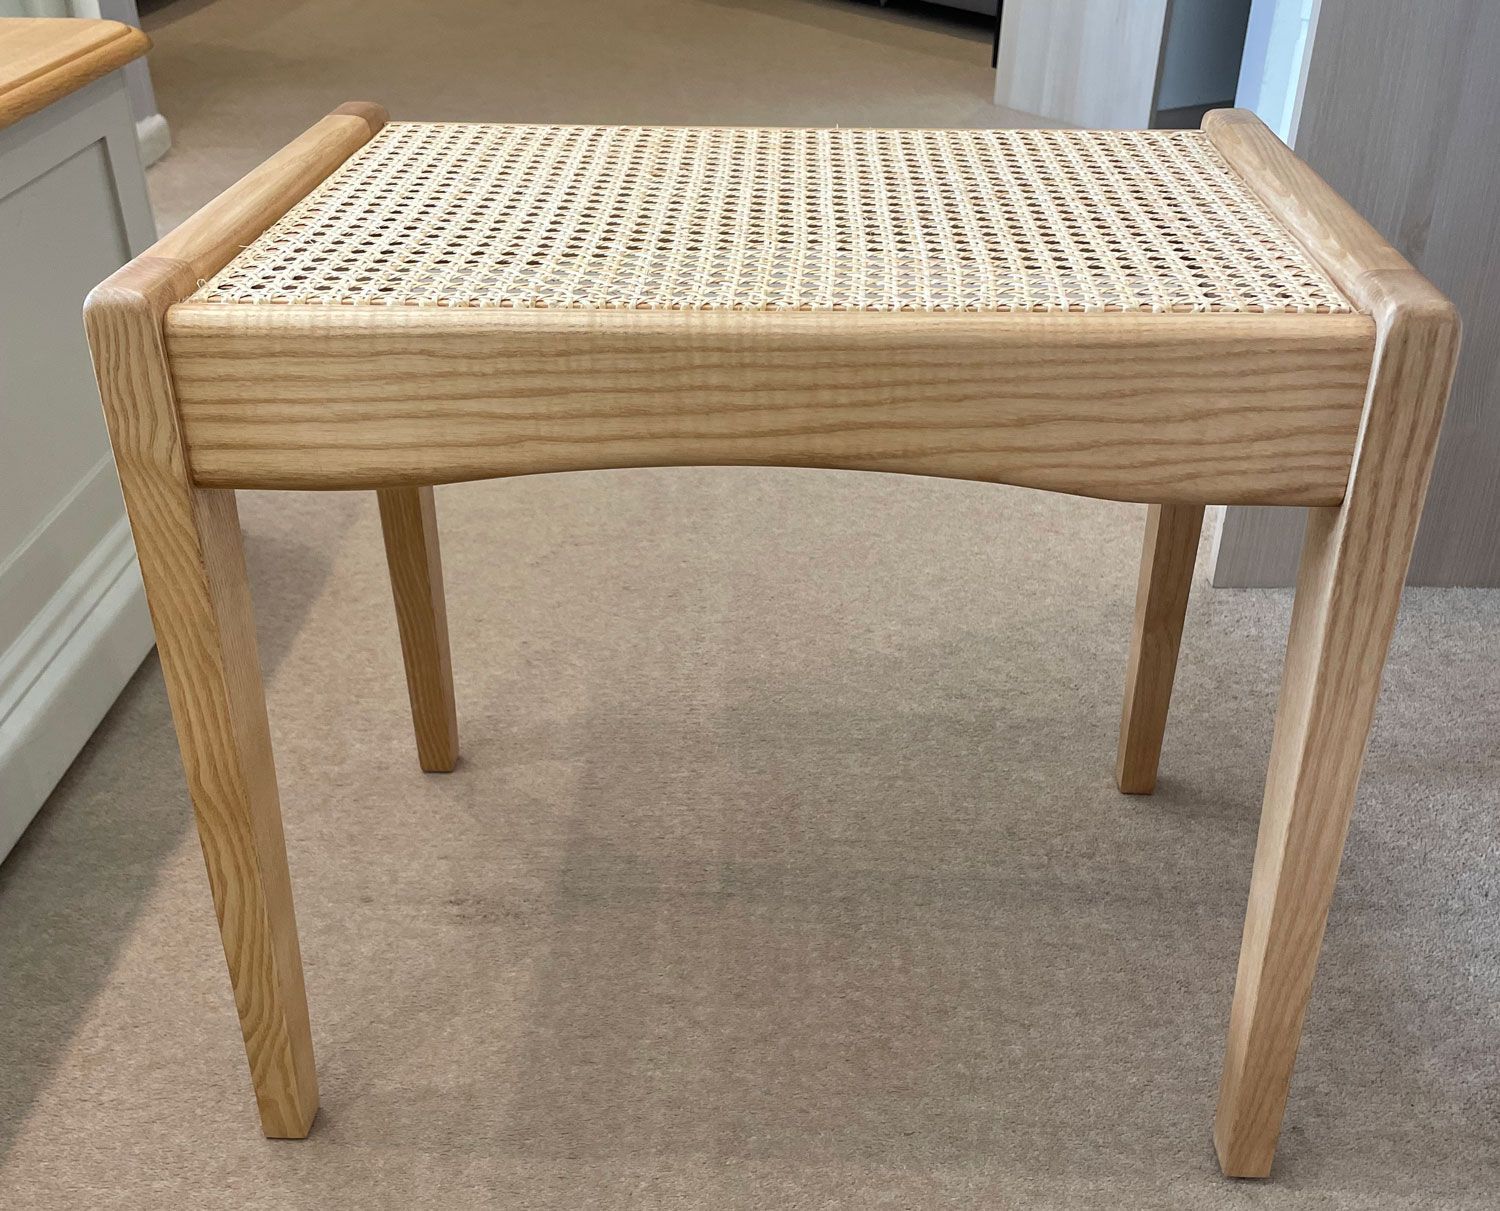 ​CLEARANCE Cotswold Caners Cherrington Stool MRP £155 WAS £99 NOW £79